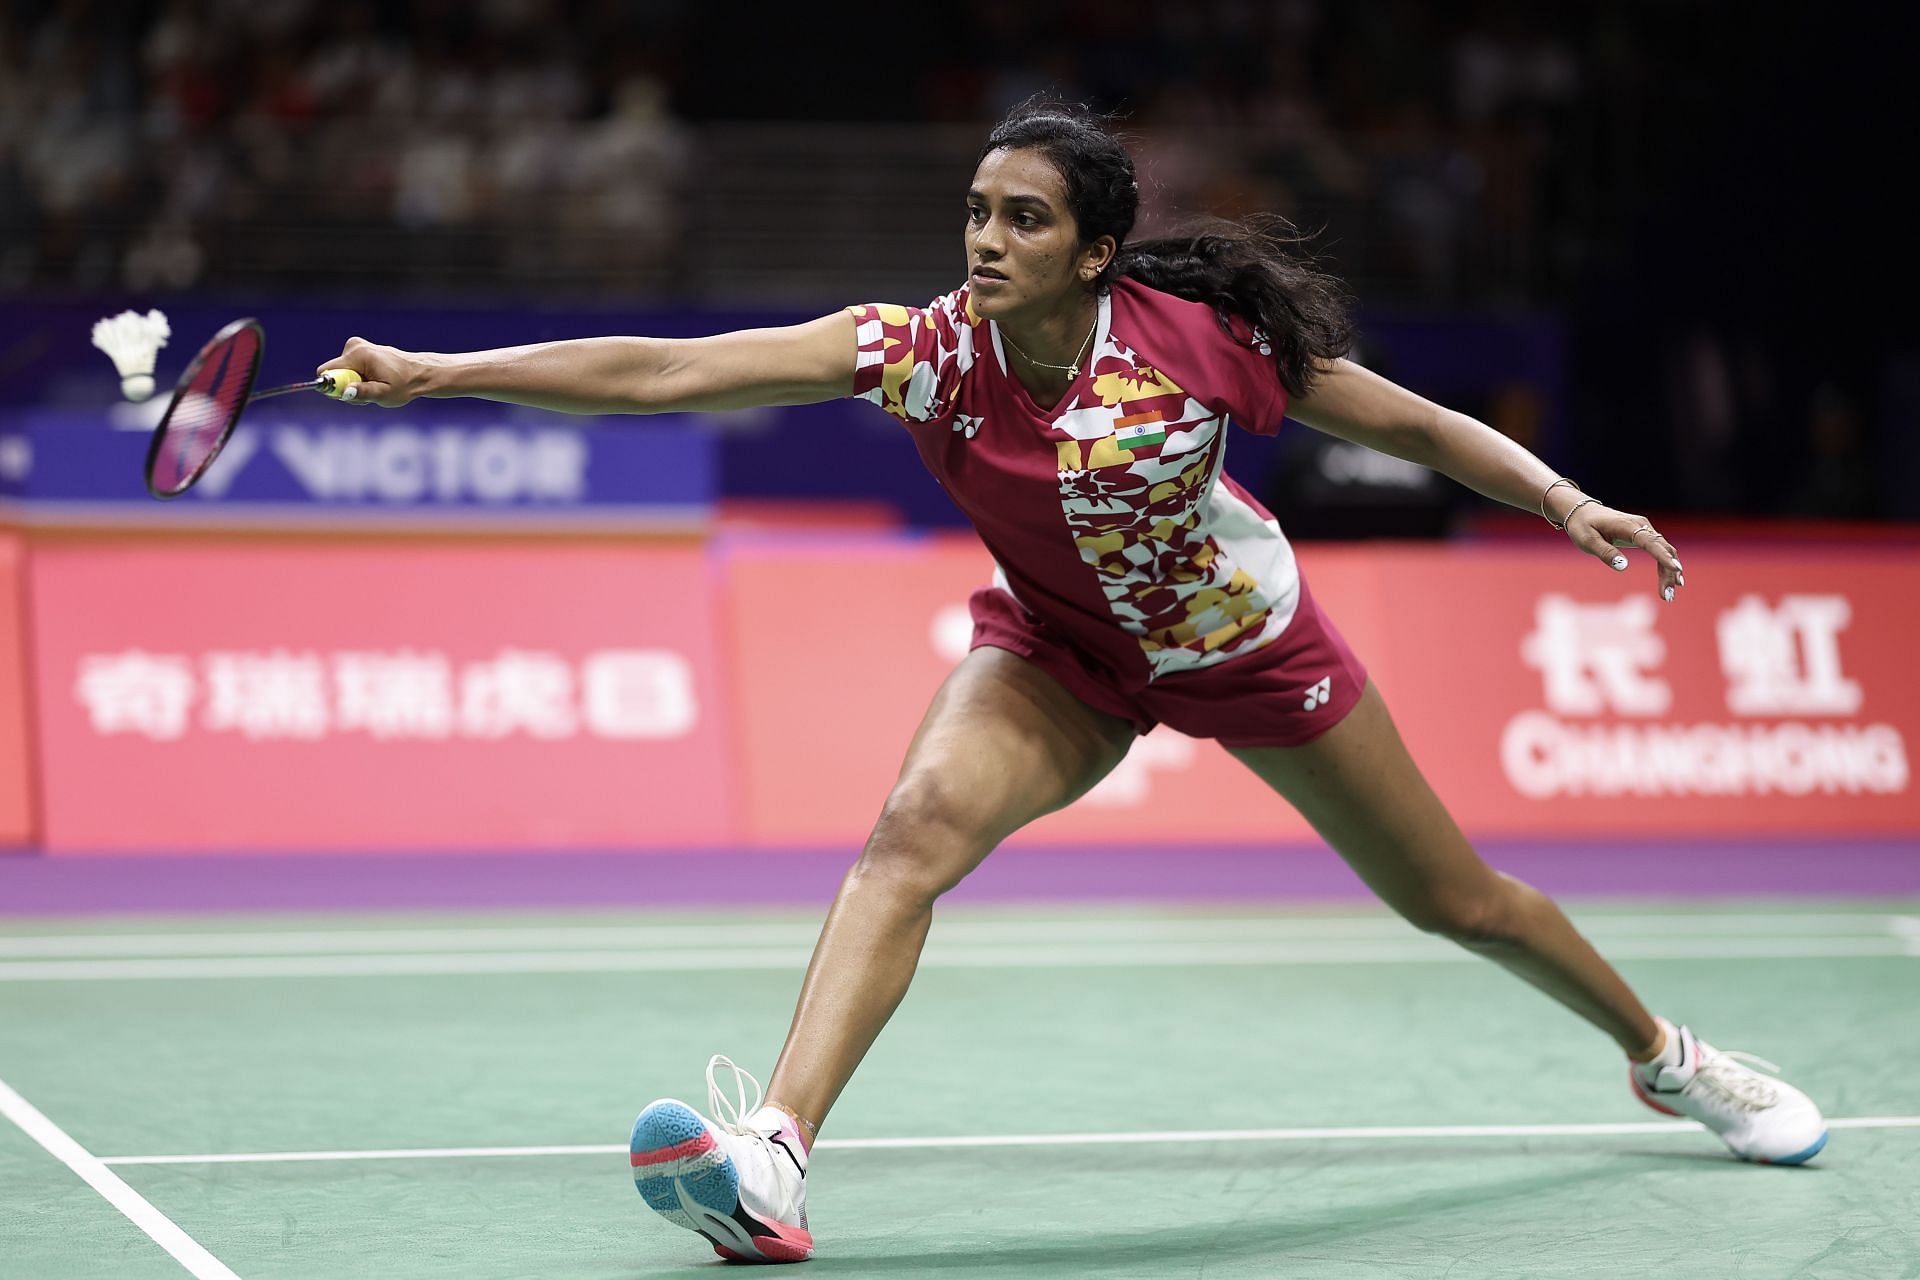 Australian Open Badminton 2023 PV Sindhu vs Aakarshi Kashyap, head-to-head, prediction, where to watch and live streaming details